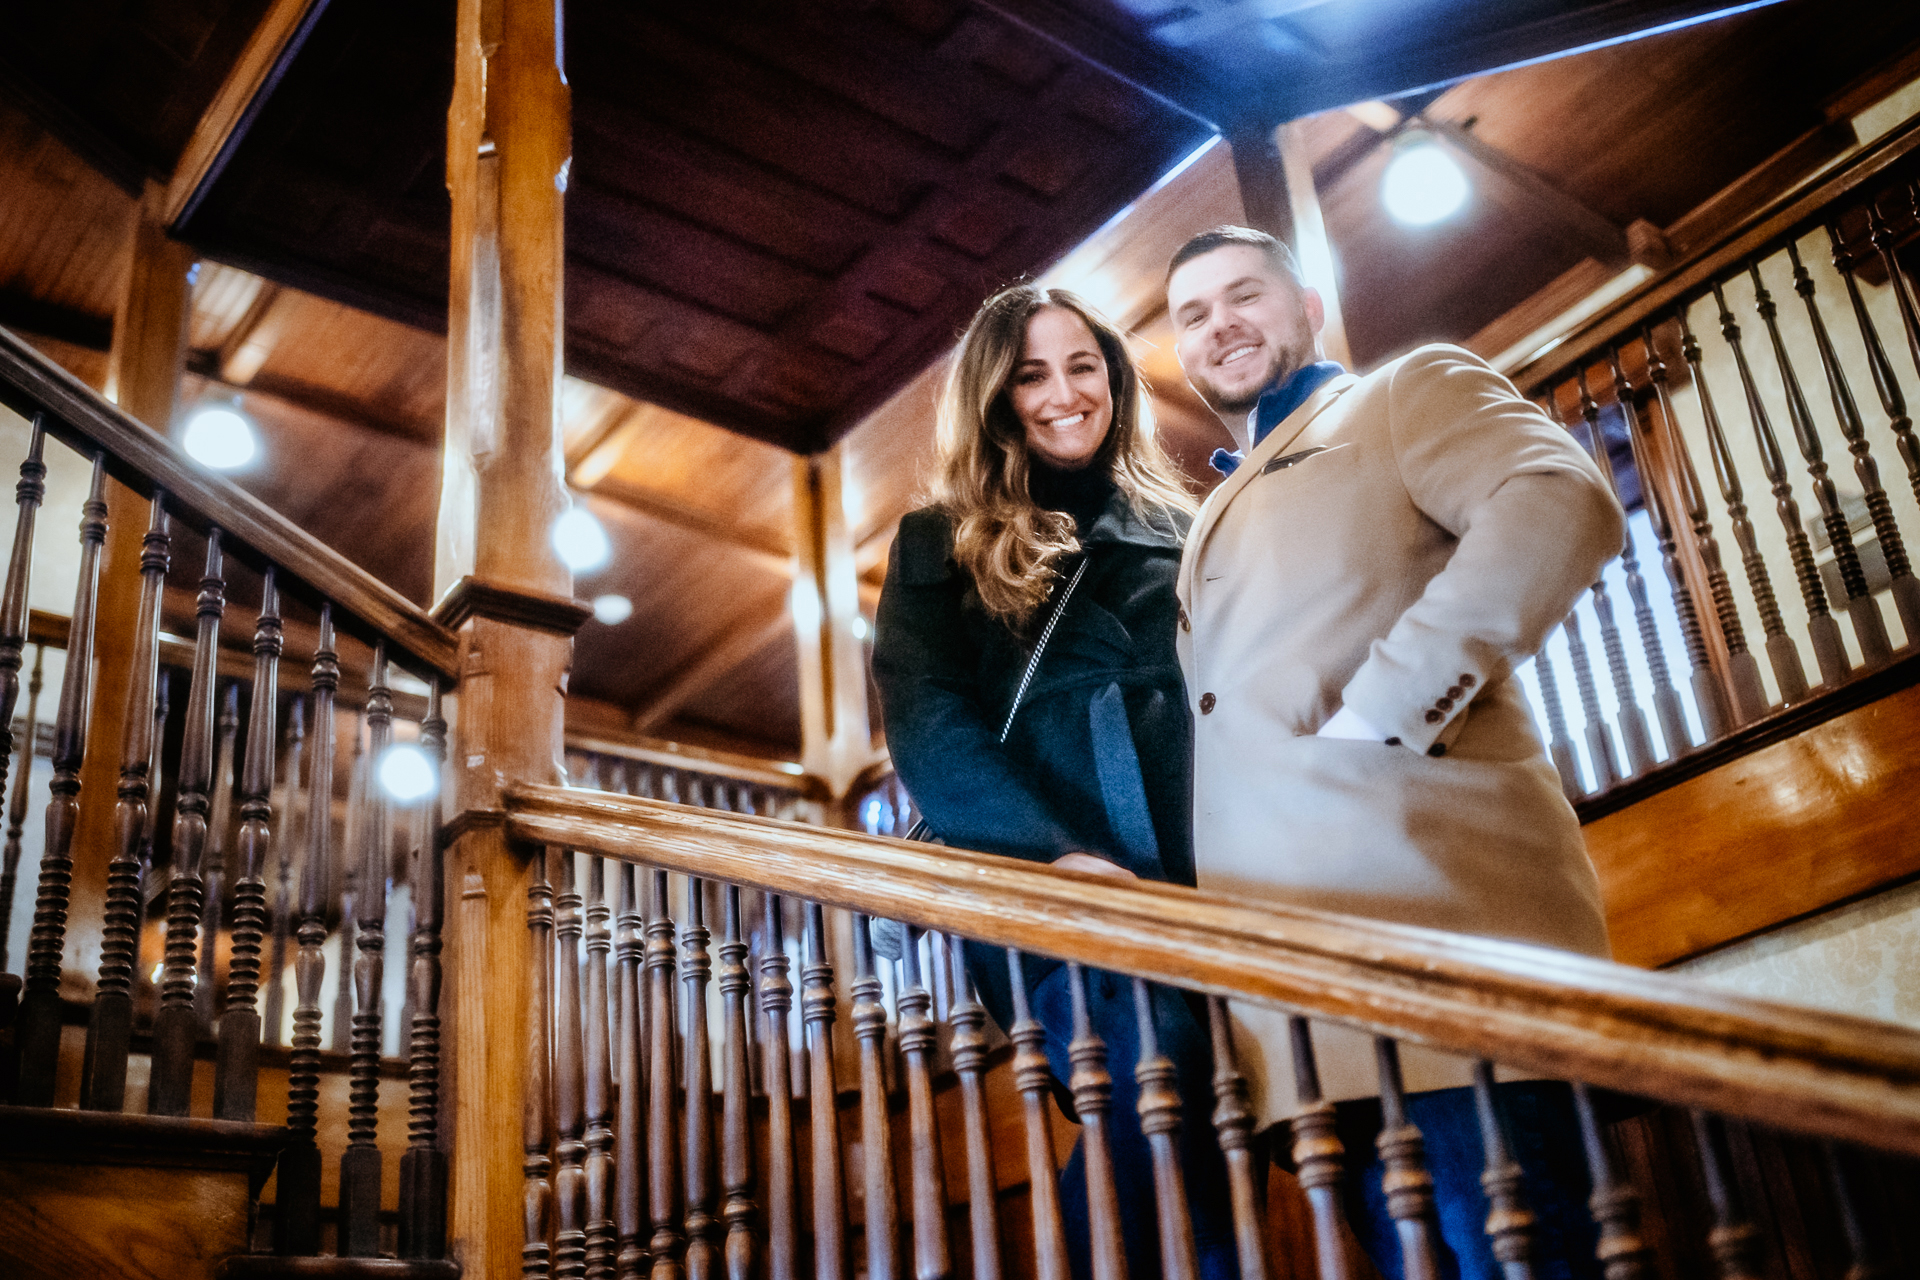 Mohonk engagement photos